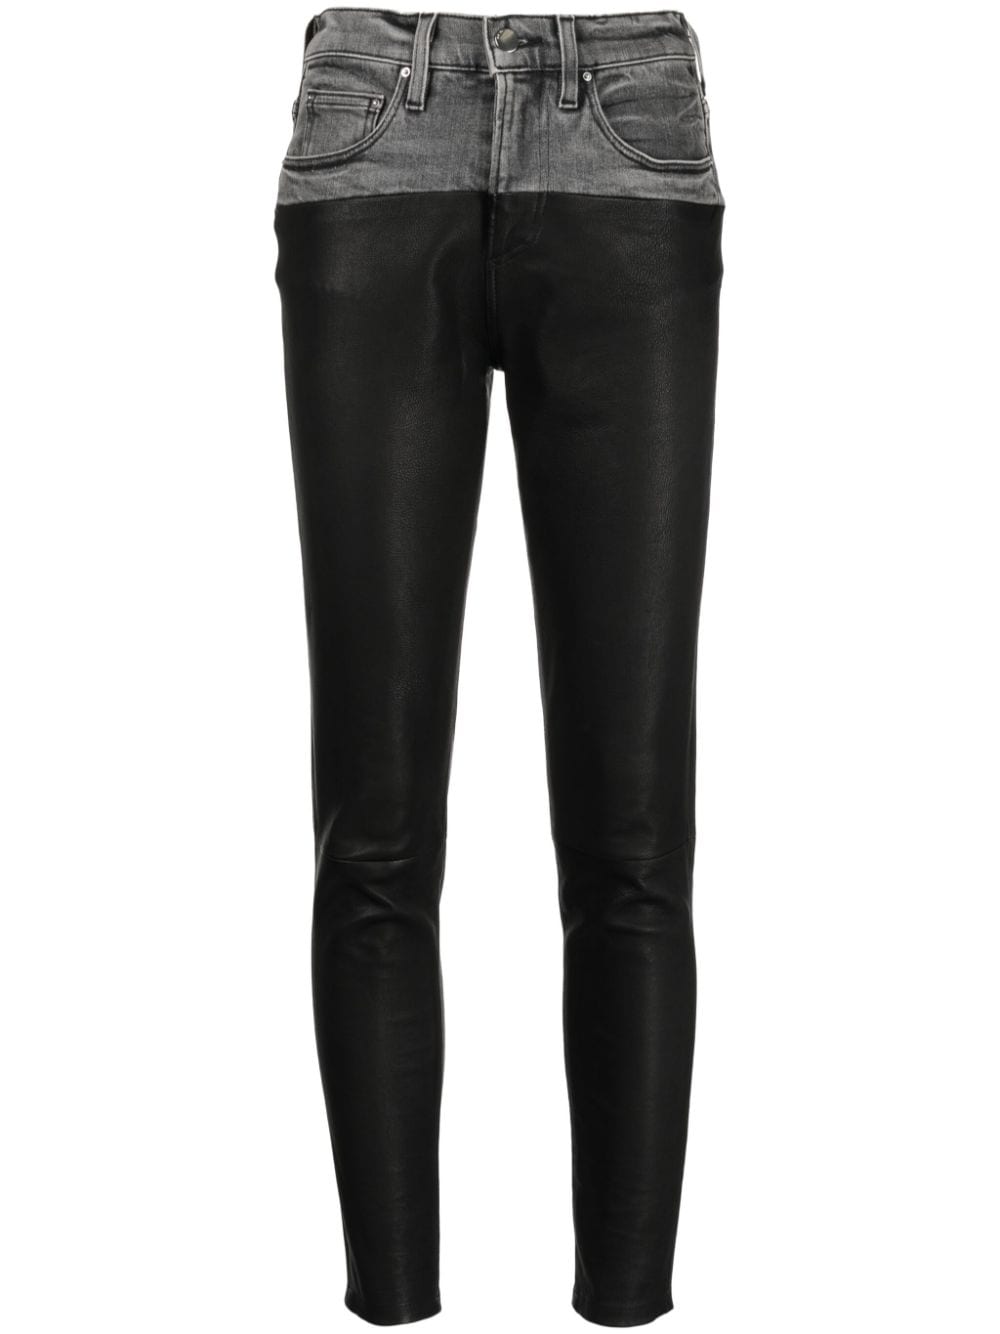 Leather-panelled skinny jeans